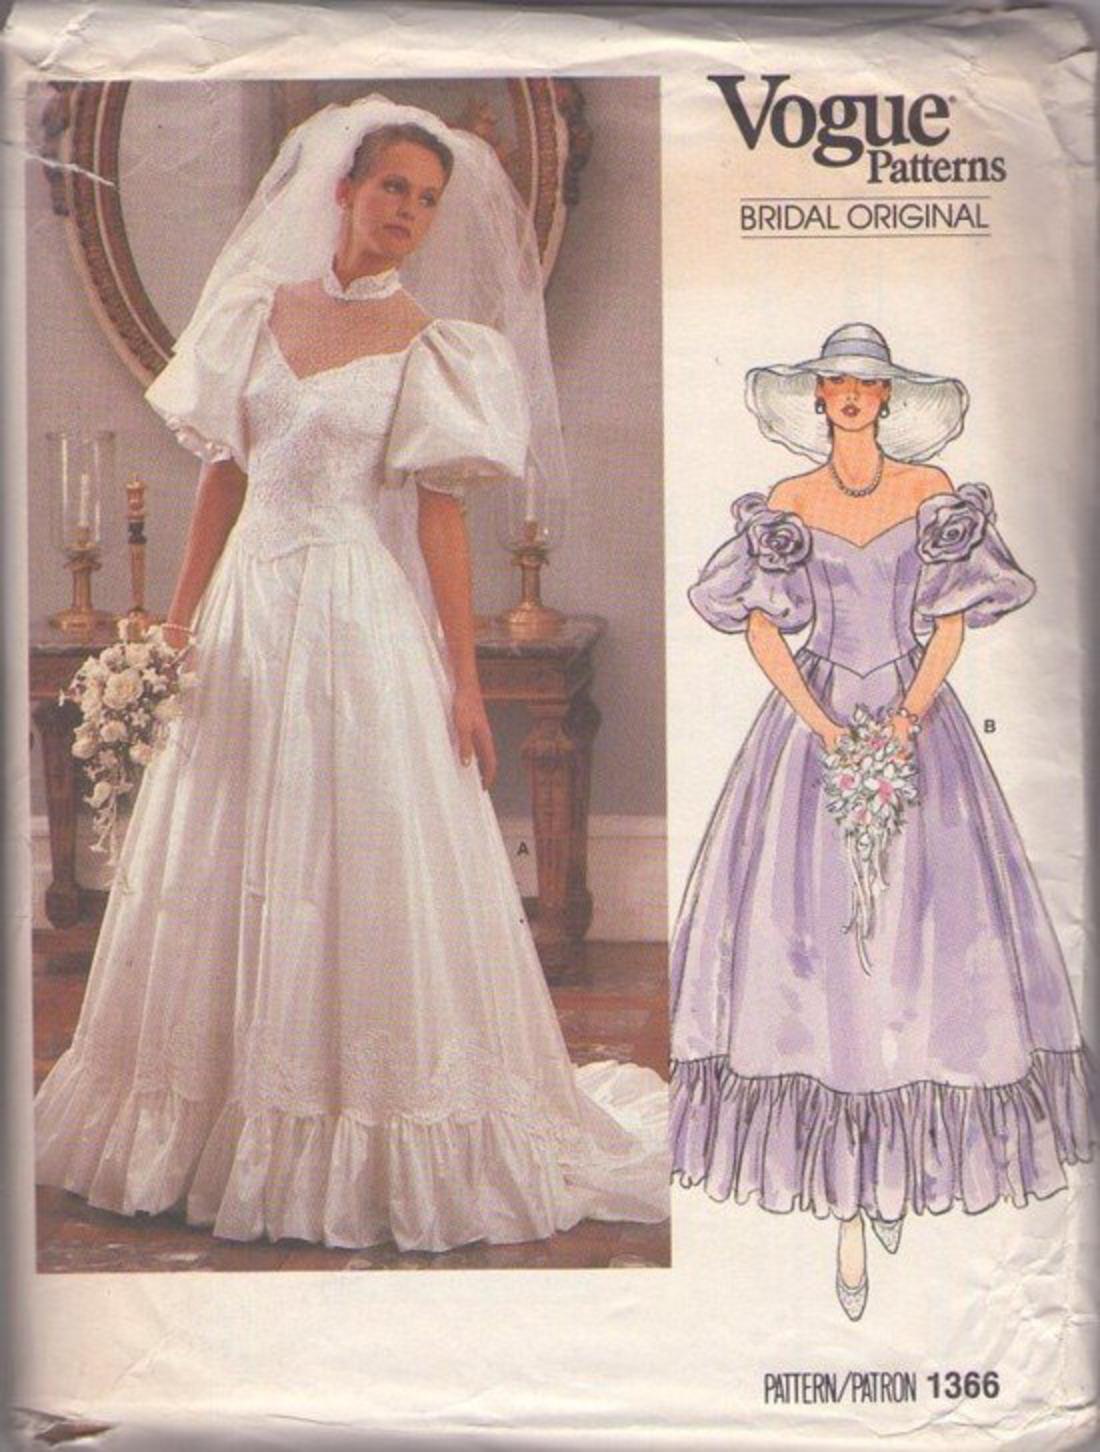 1940 WW2 Vintage VOGUE Sewing Pattern B32 WEDDING BRIDAL GOWN & DRESS  (1826) By Vogue S-4205 - The Vintage Pattern Shop